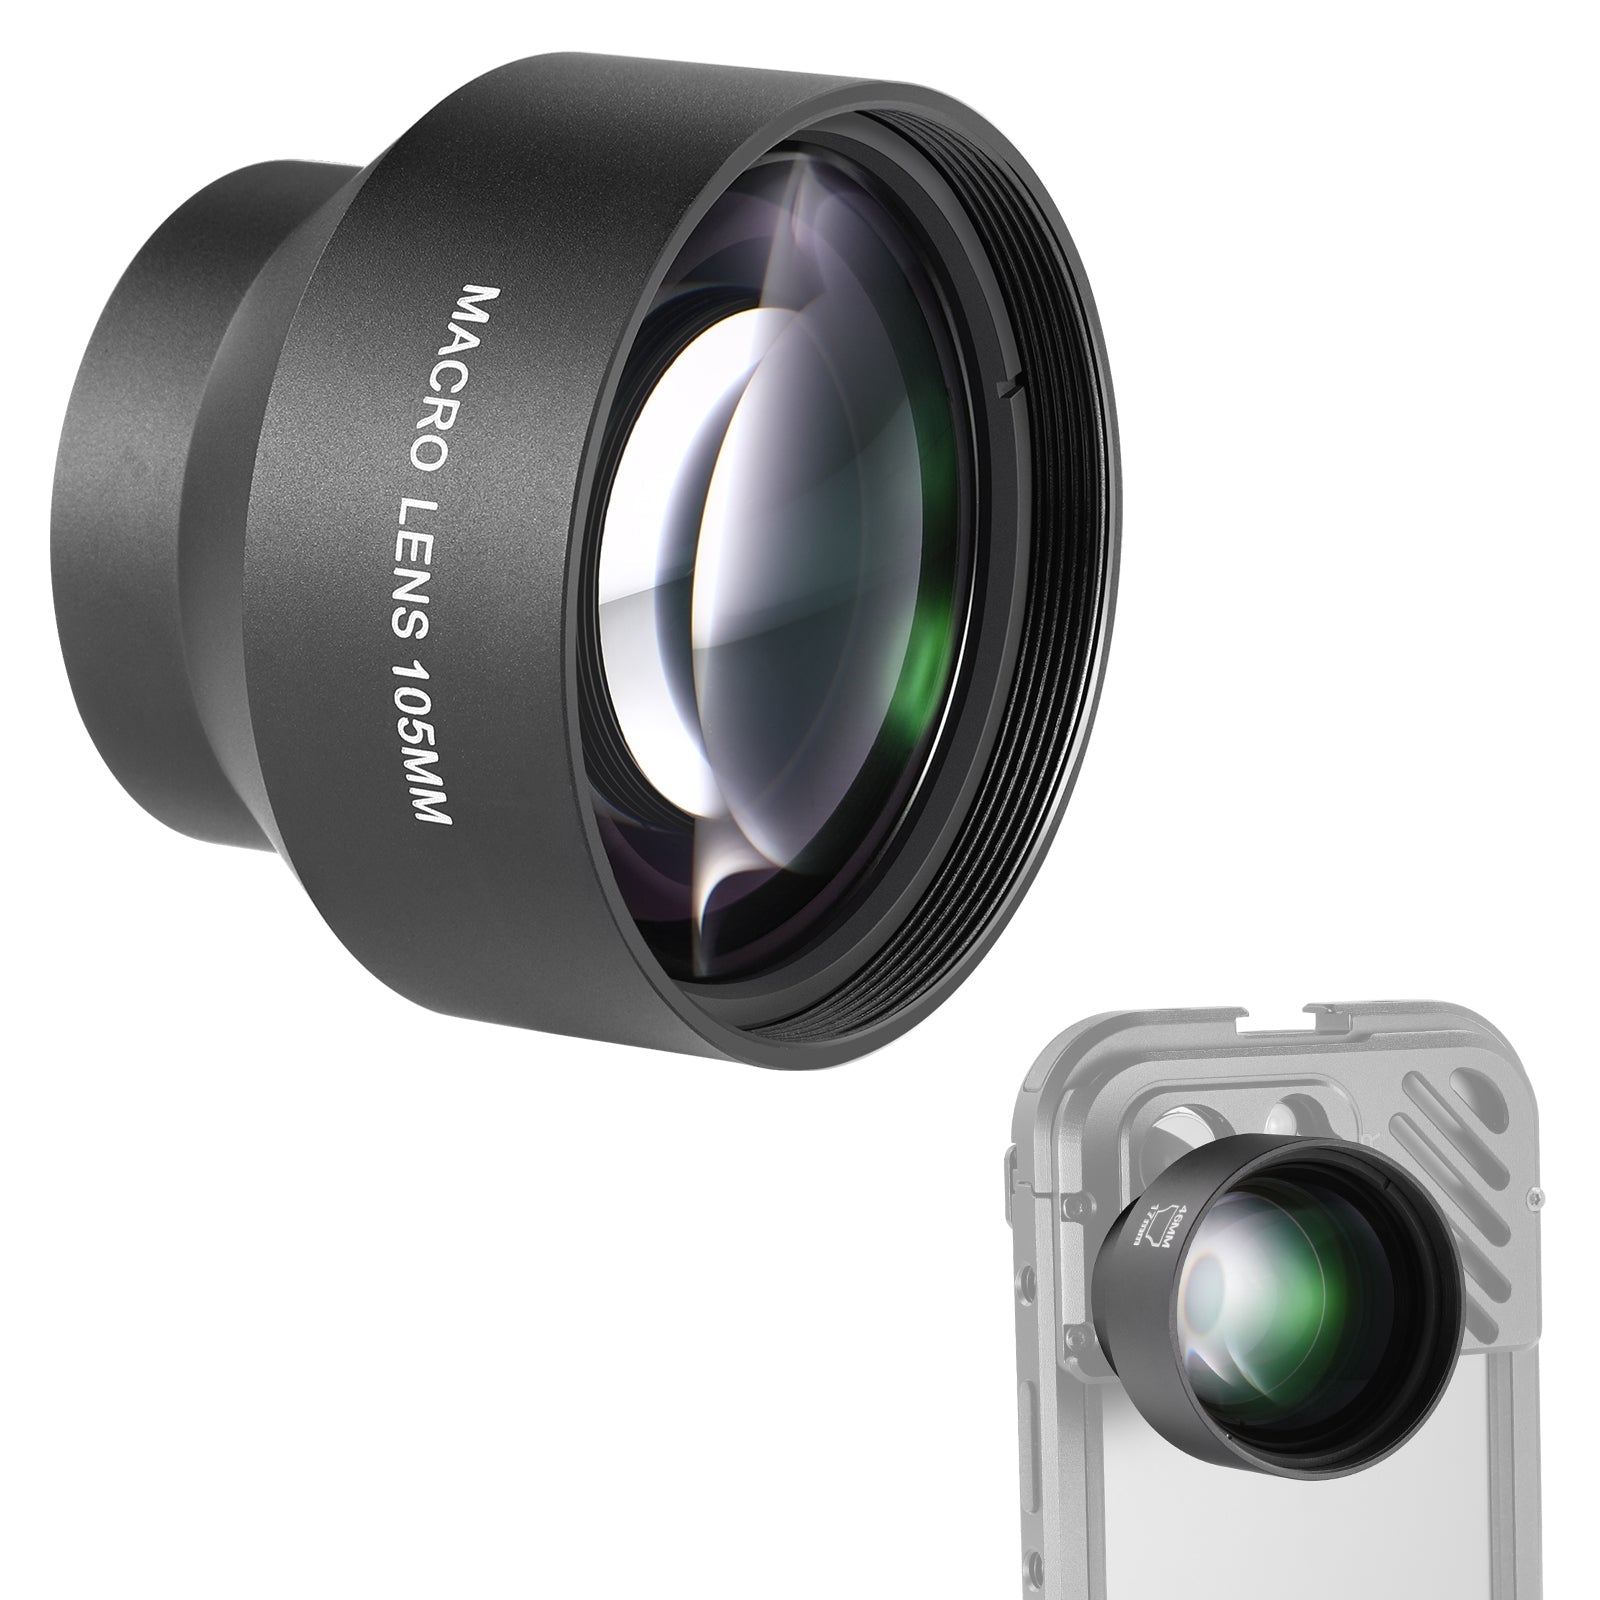 NEEWER LS-26 Objectif Macro HD 105mm Compatible avec iPhone Samsung Cage